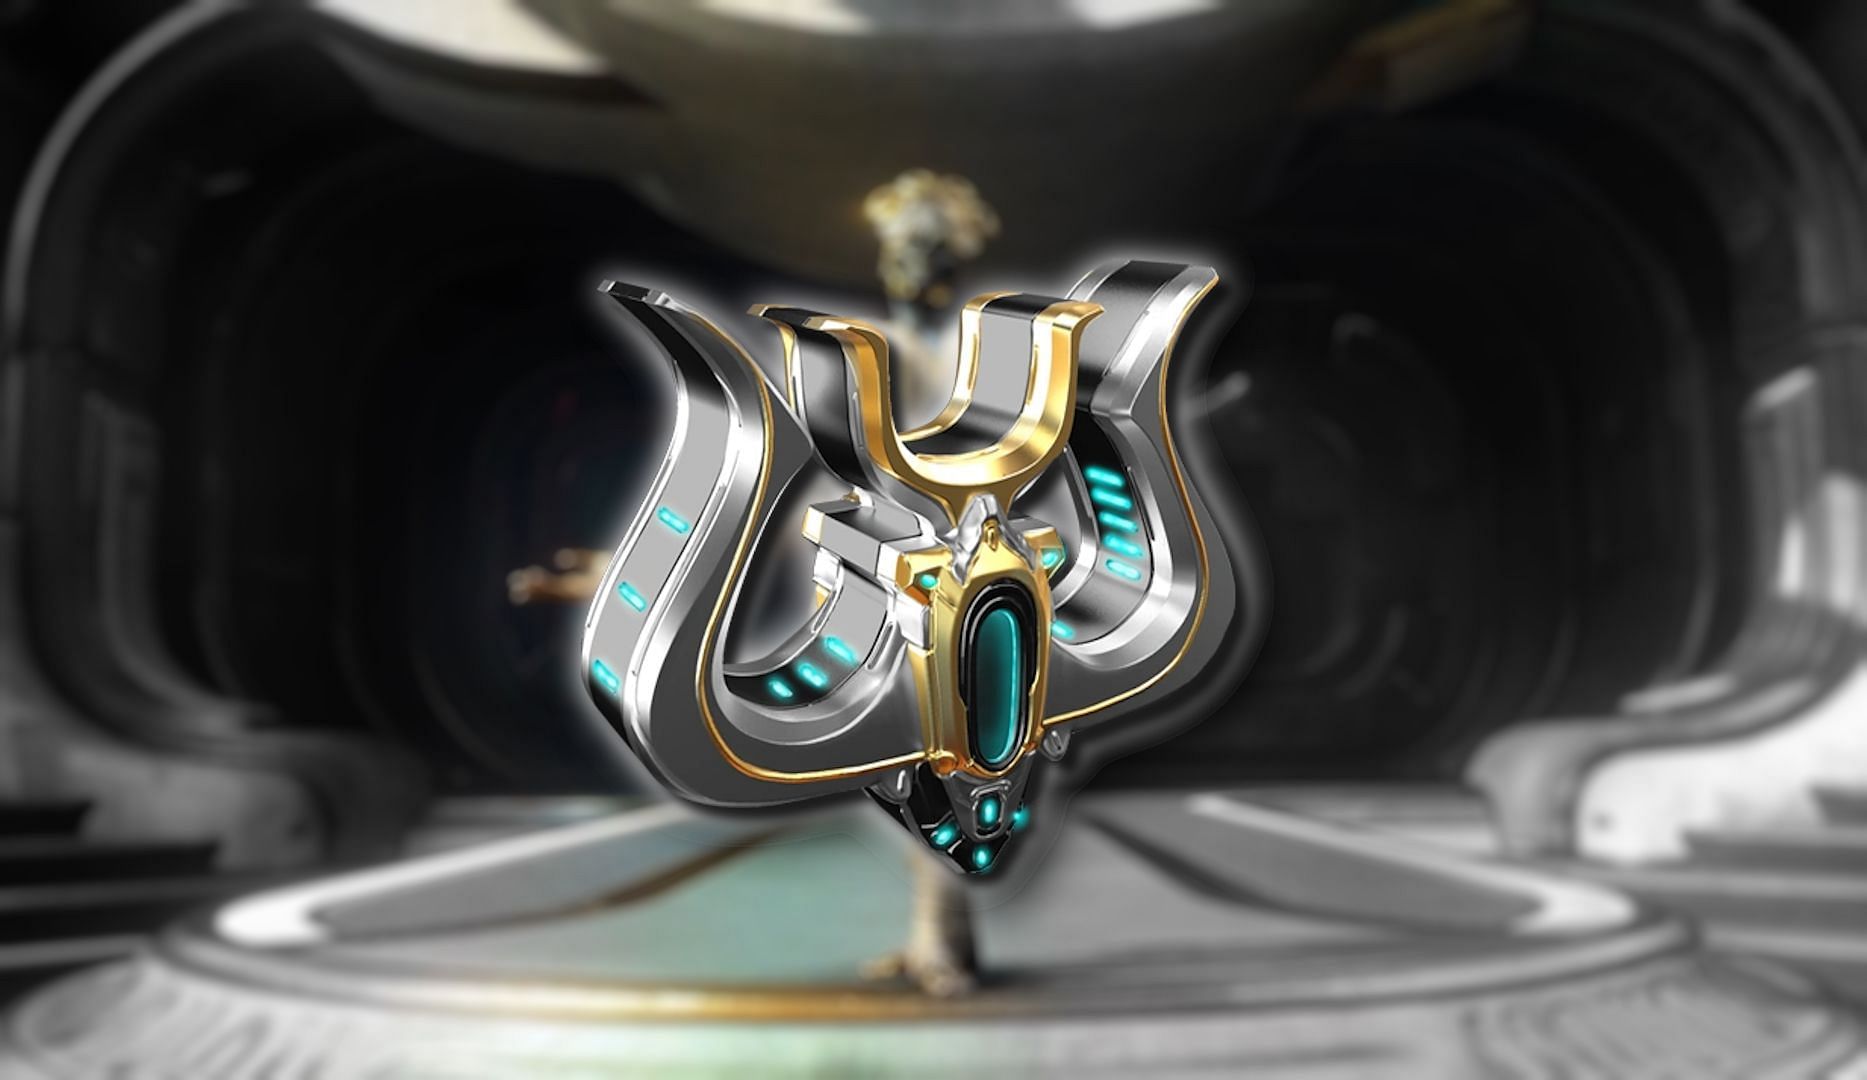 An Umbra Forma in Warframe on the foreground with a blurred background